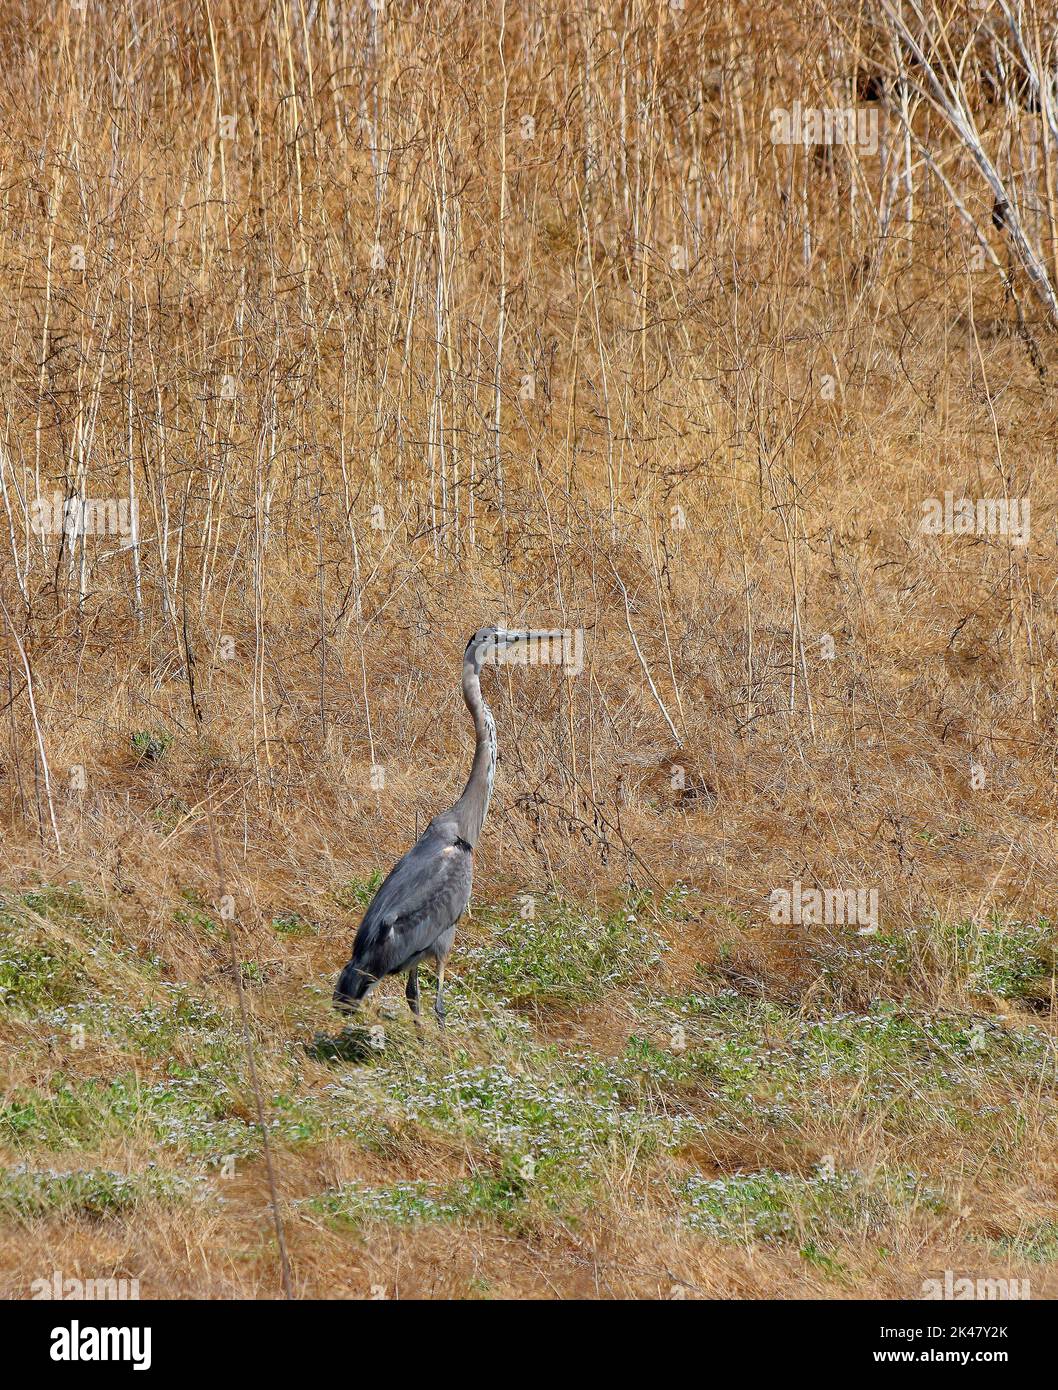 Great Blue Heron, Alameda Creek near the Stables Staging Area, California Stock Photo